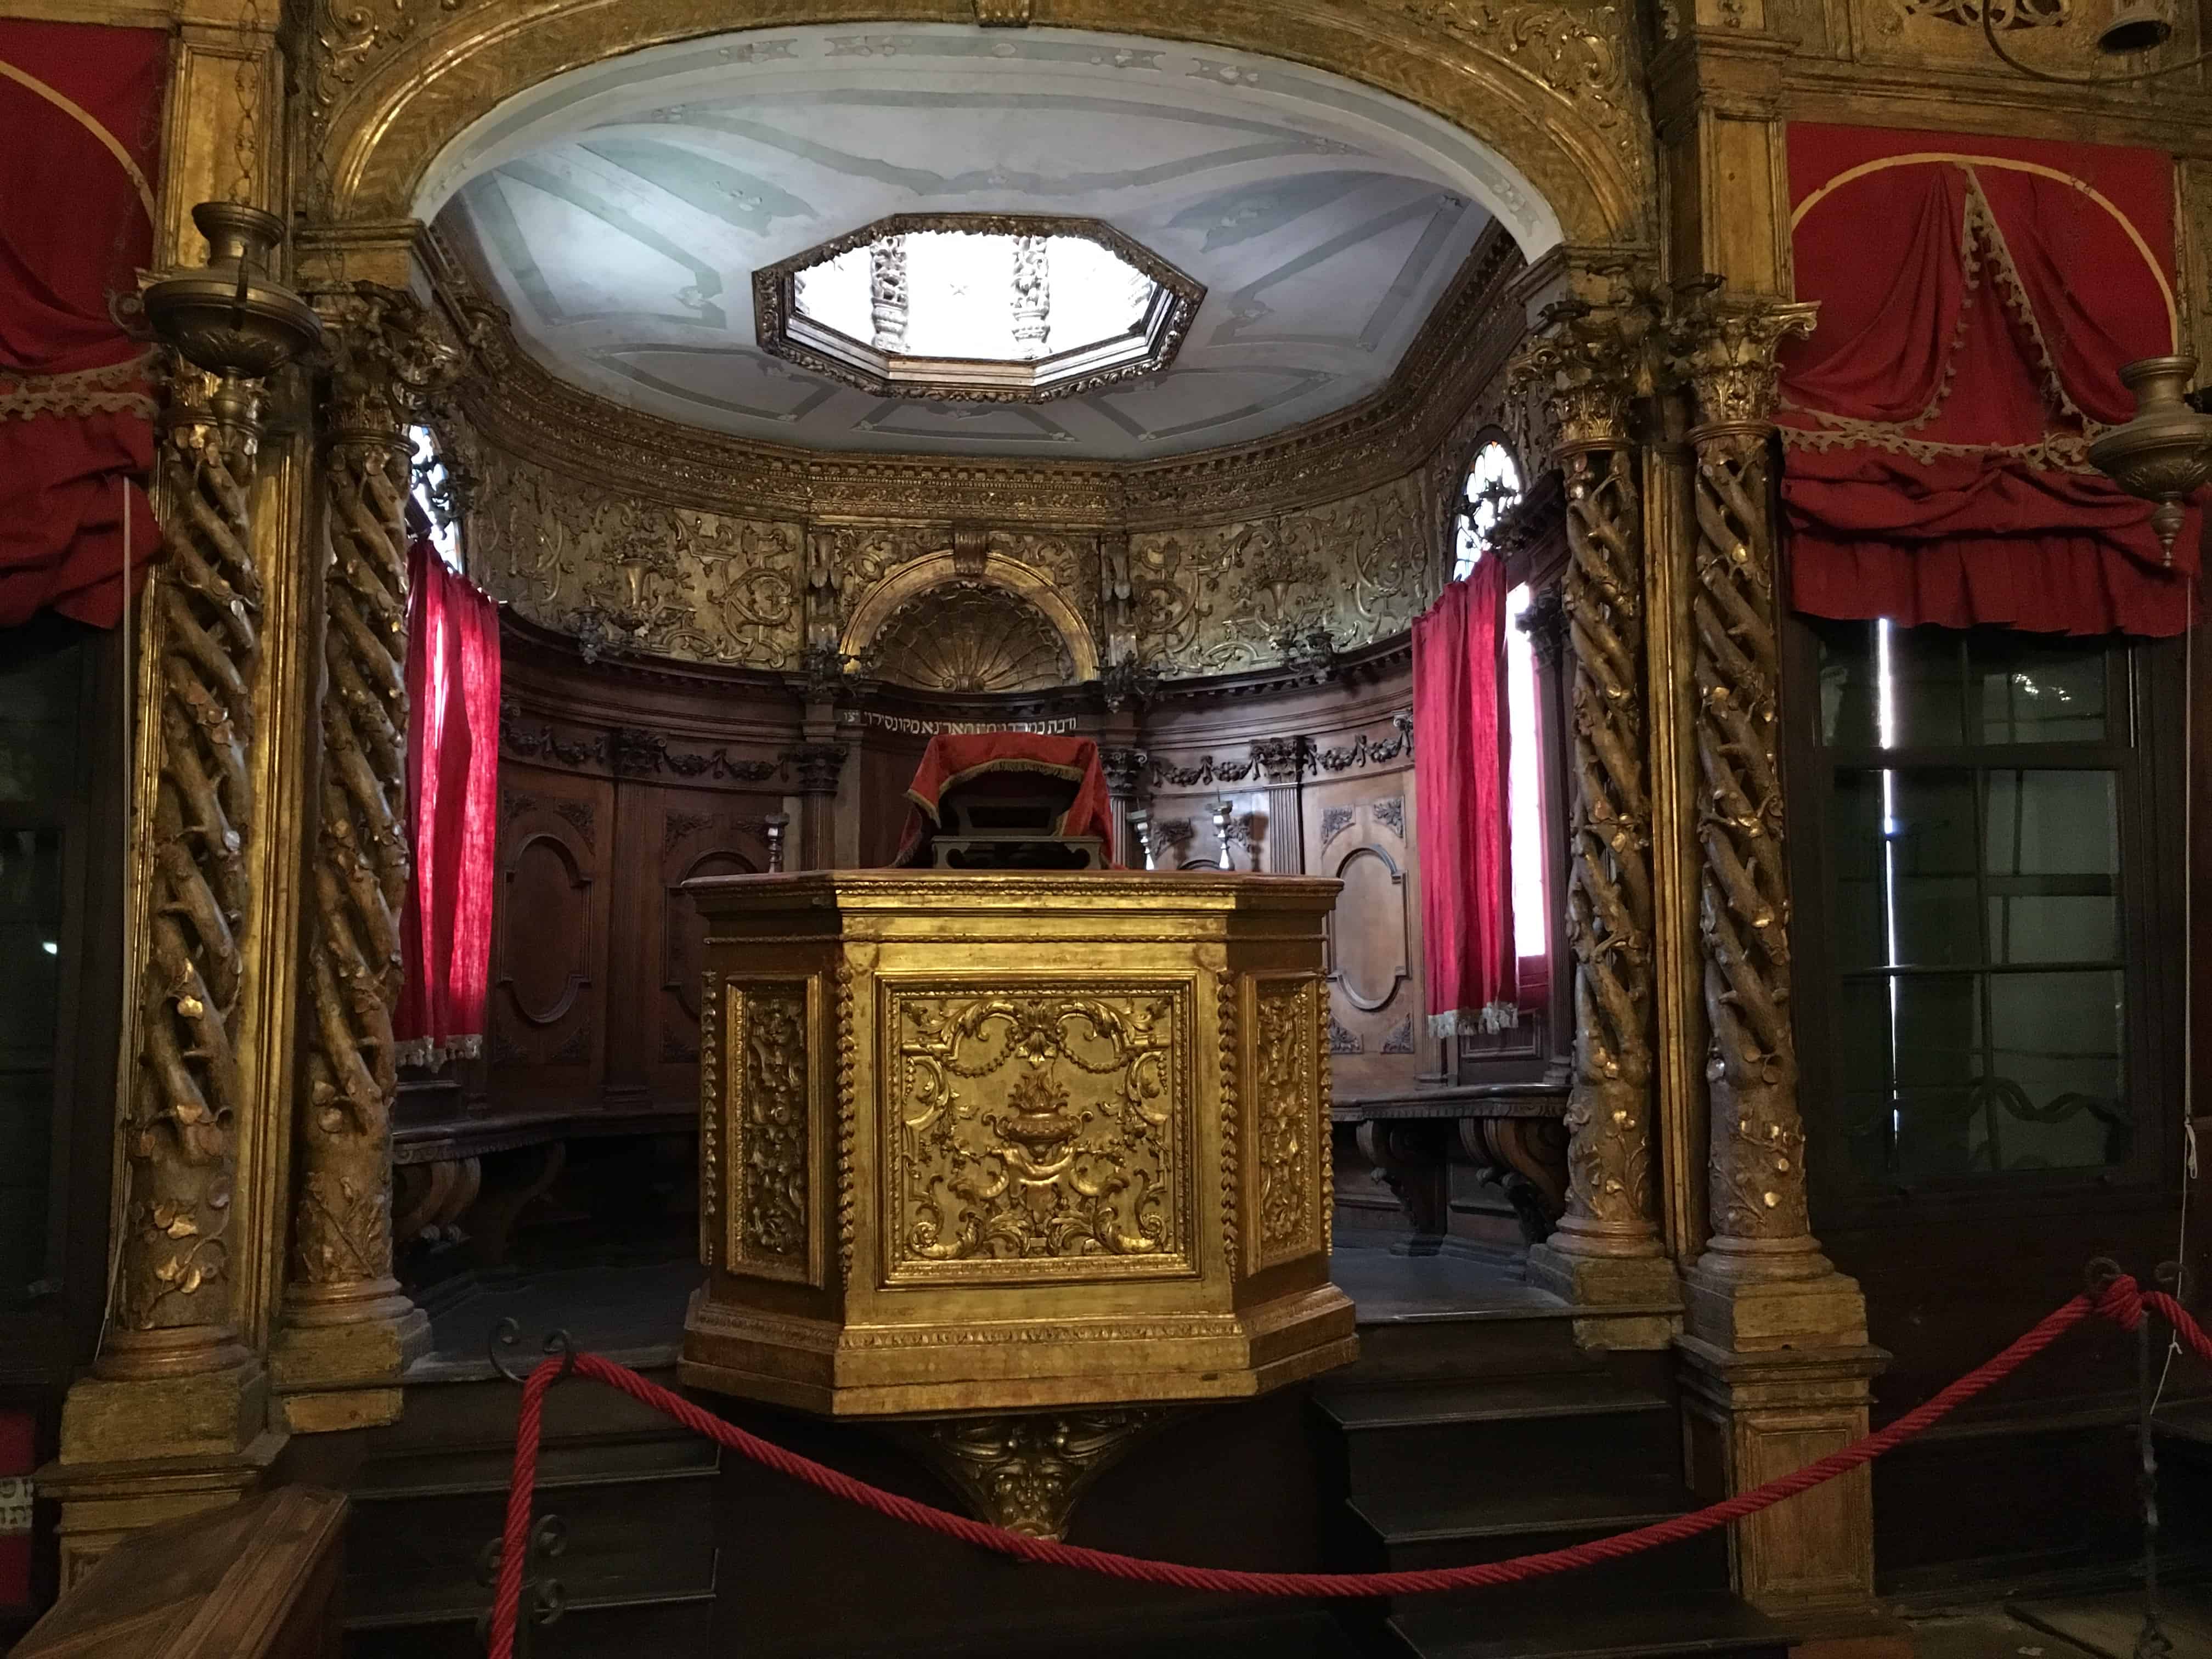 Bimah of the Canton Synagogue in Venice, Italy